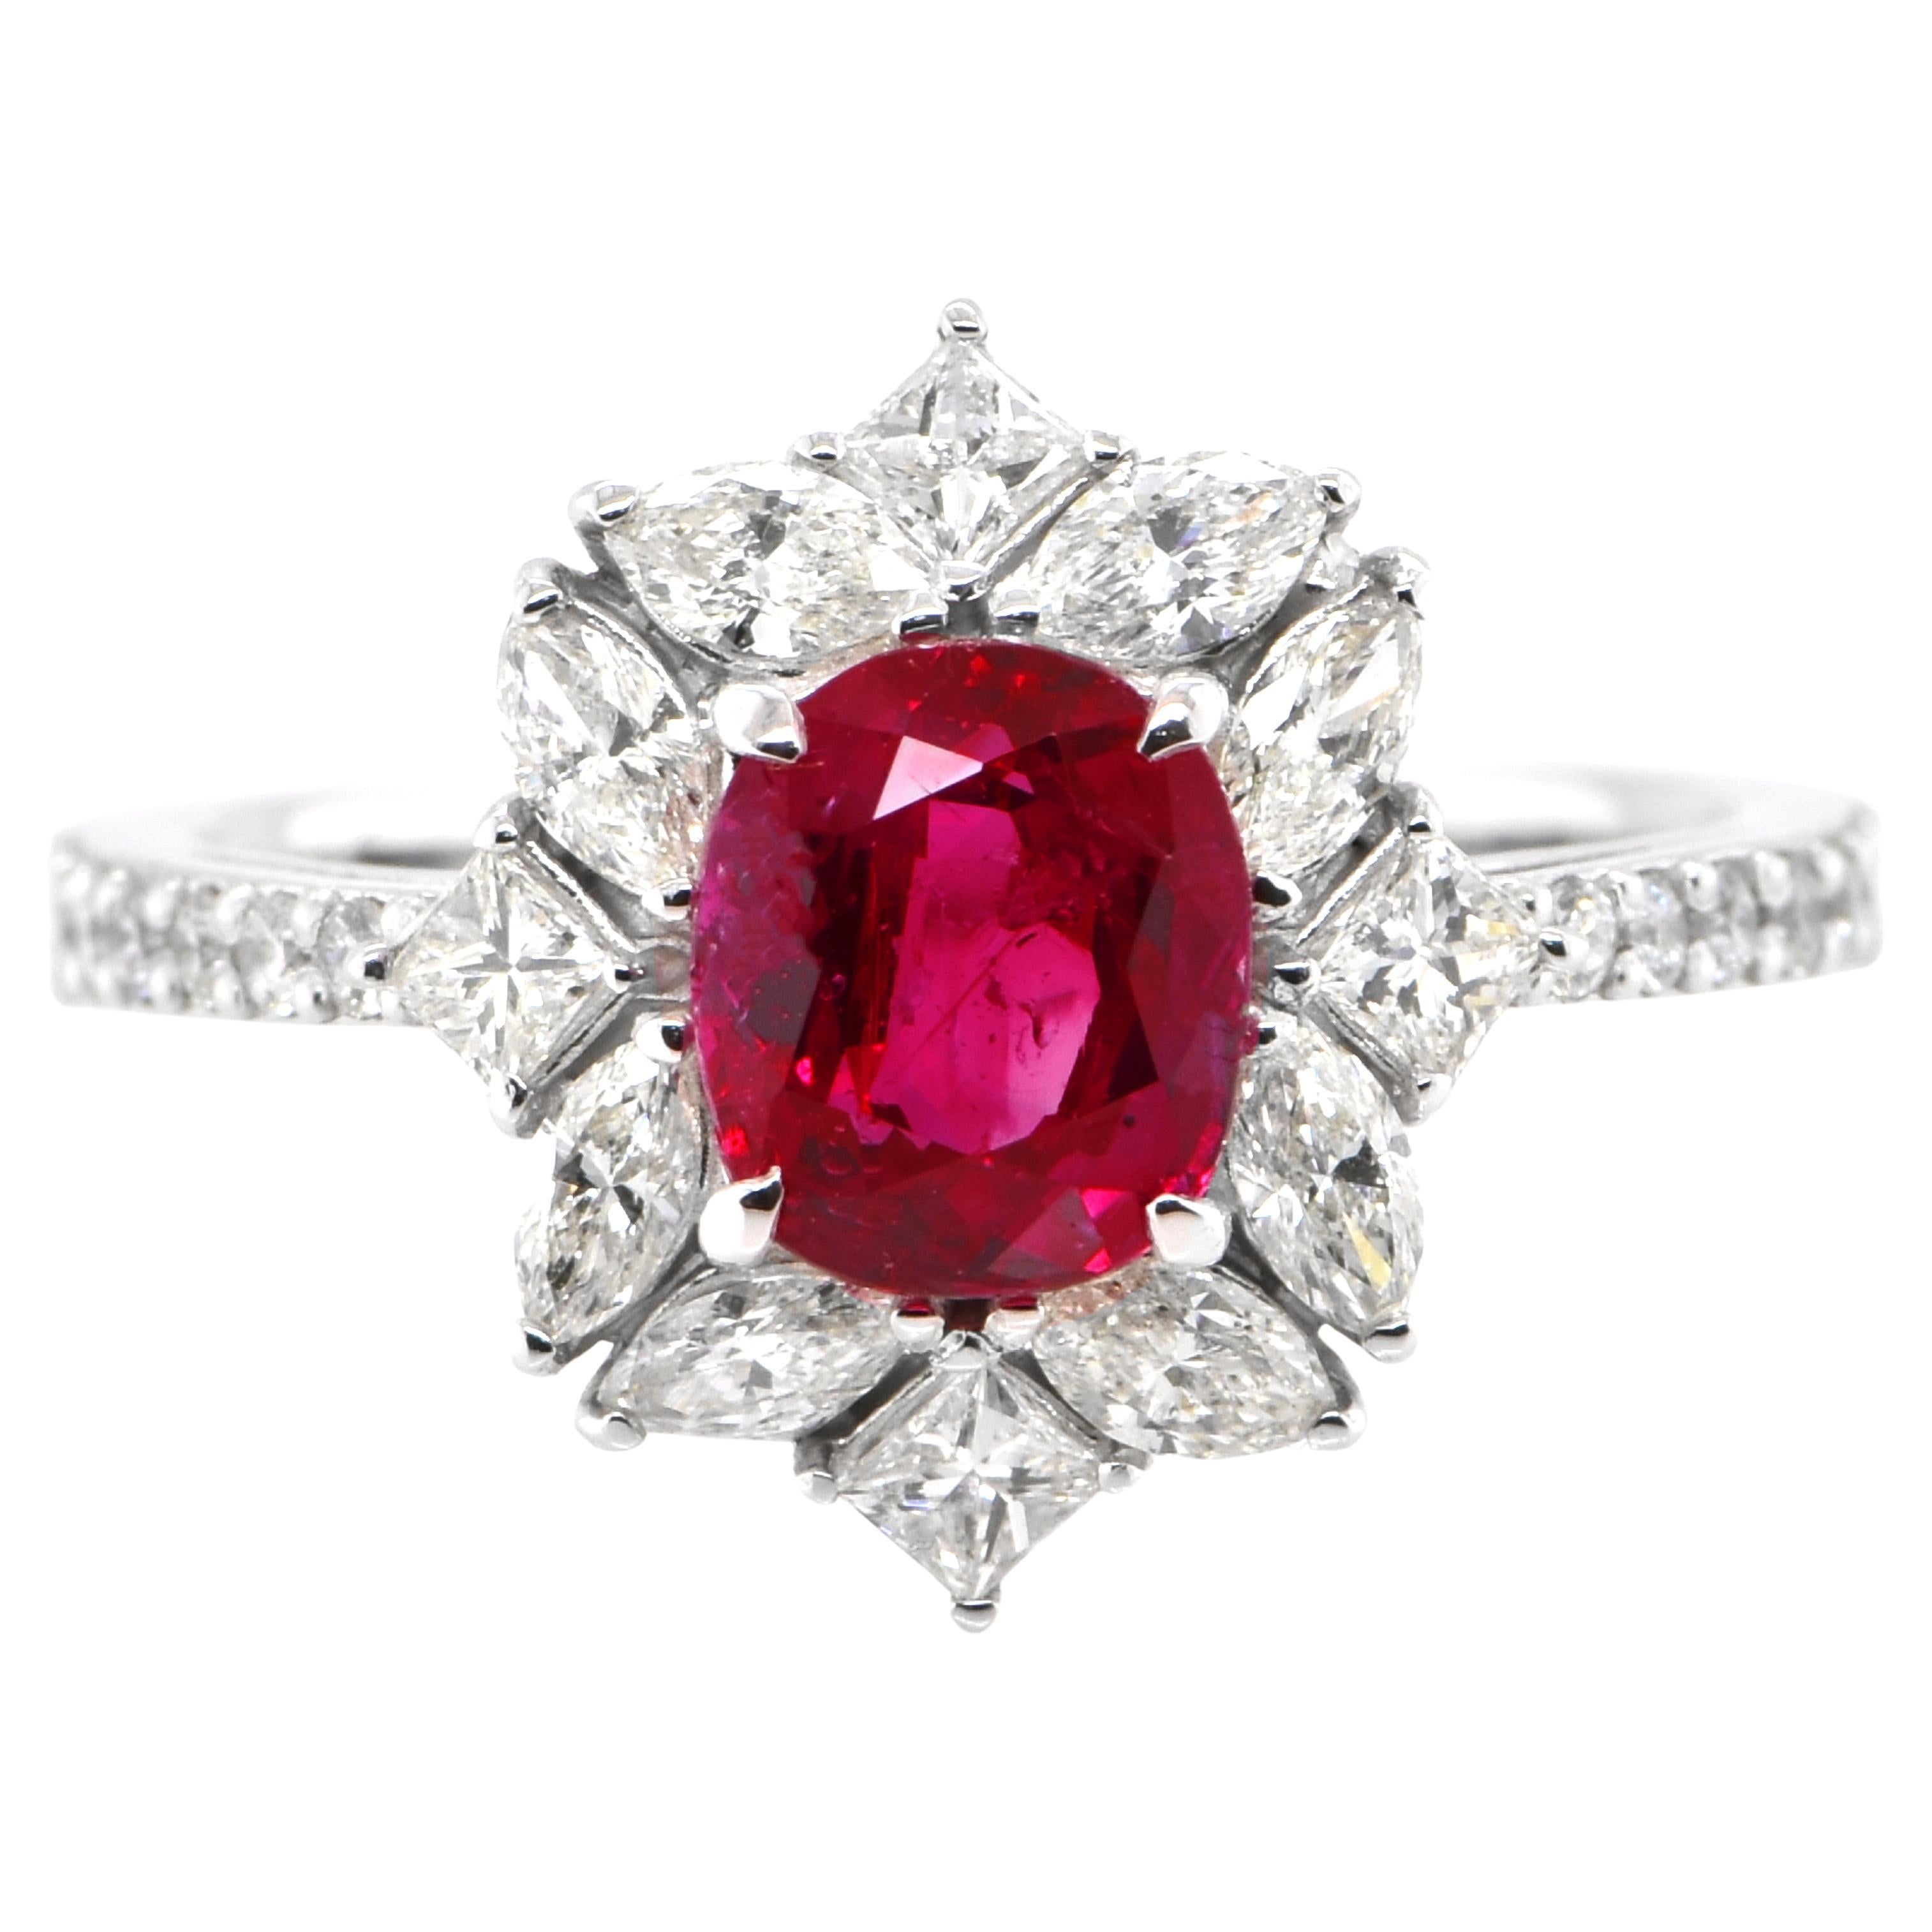 GIA Certified 1.73 Carat, Unheated, Burmese Ruby & Diamond Ring set in Platinum For Sale